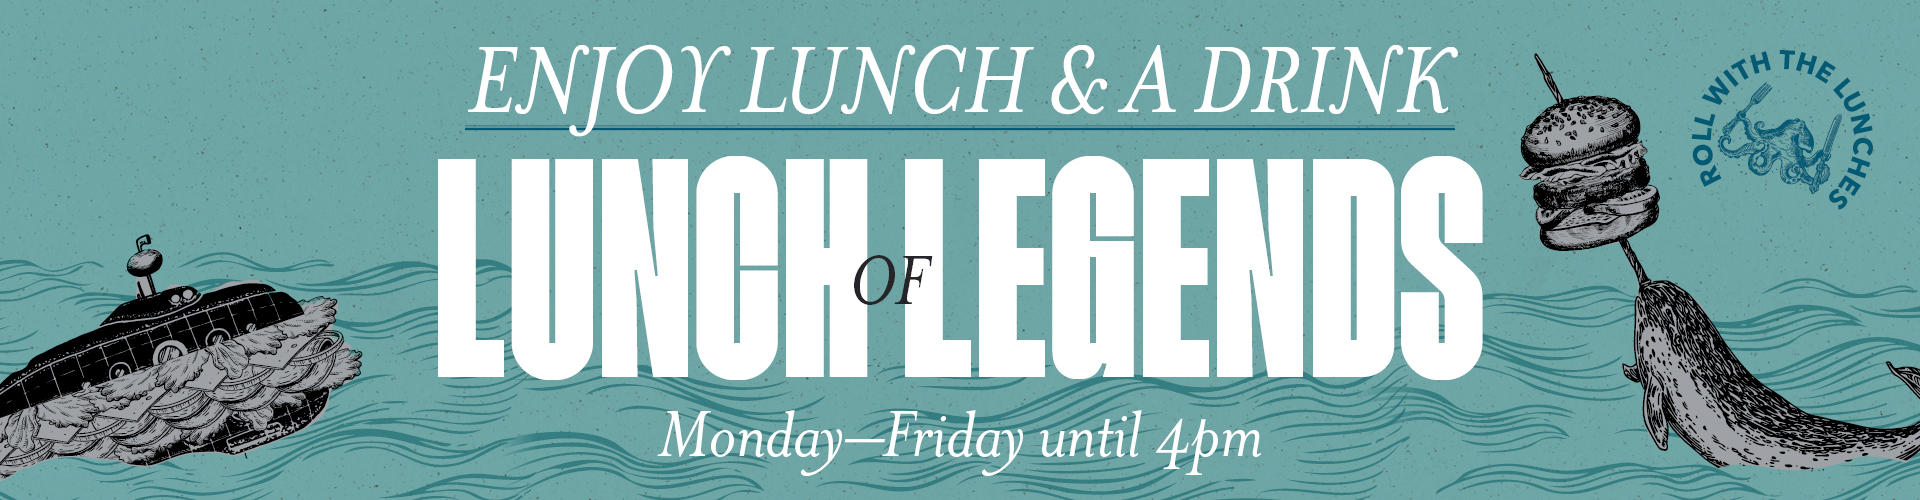 Lunch and a drink offers in Durham | The Library